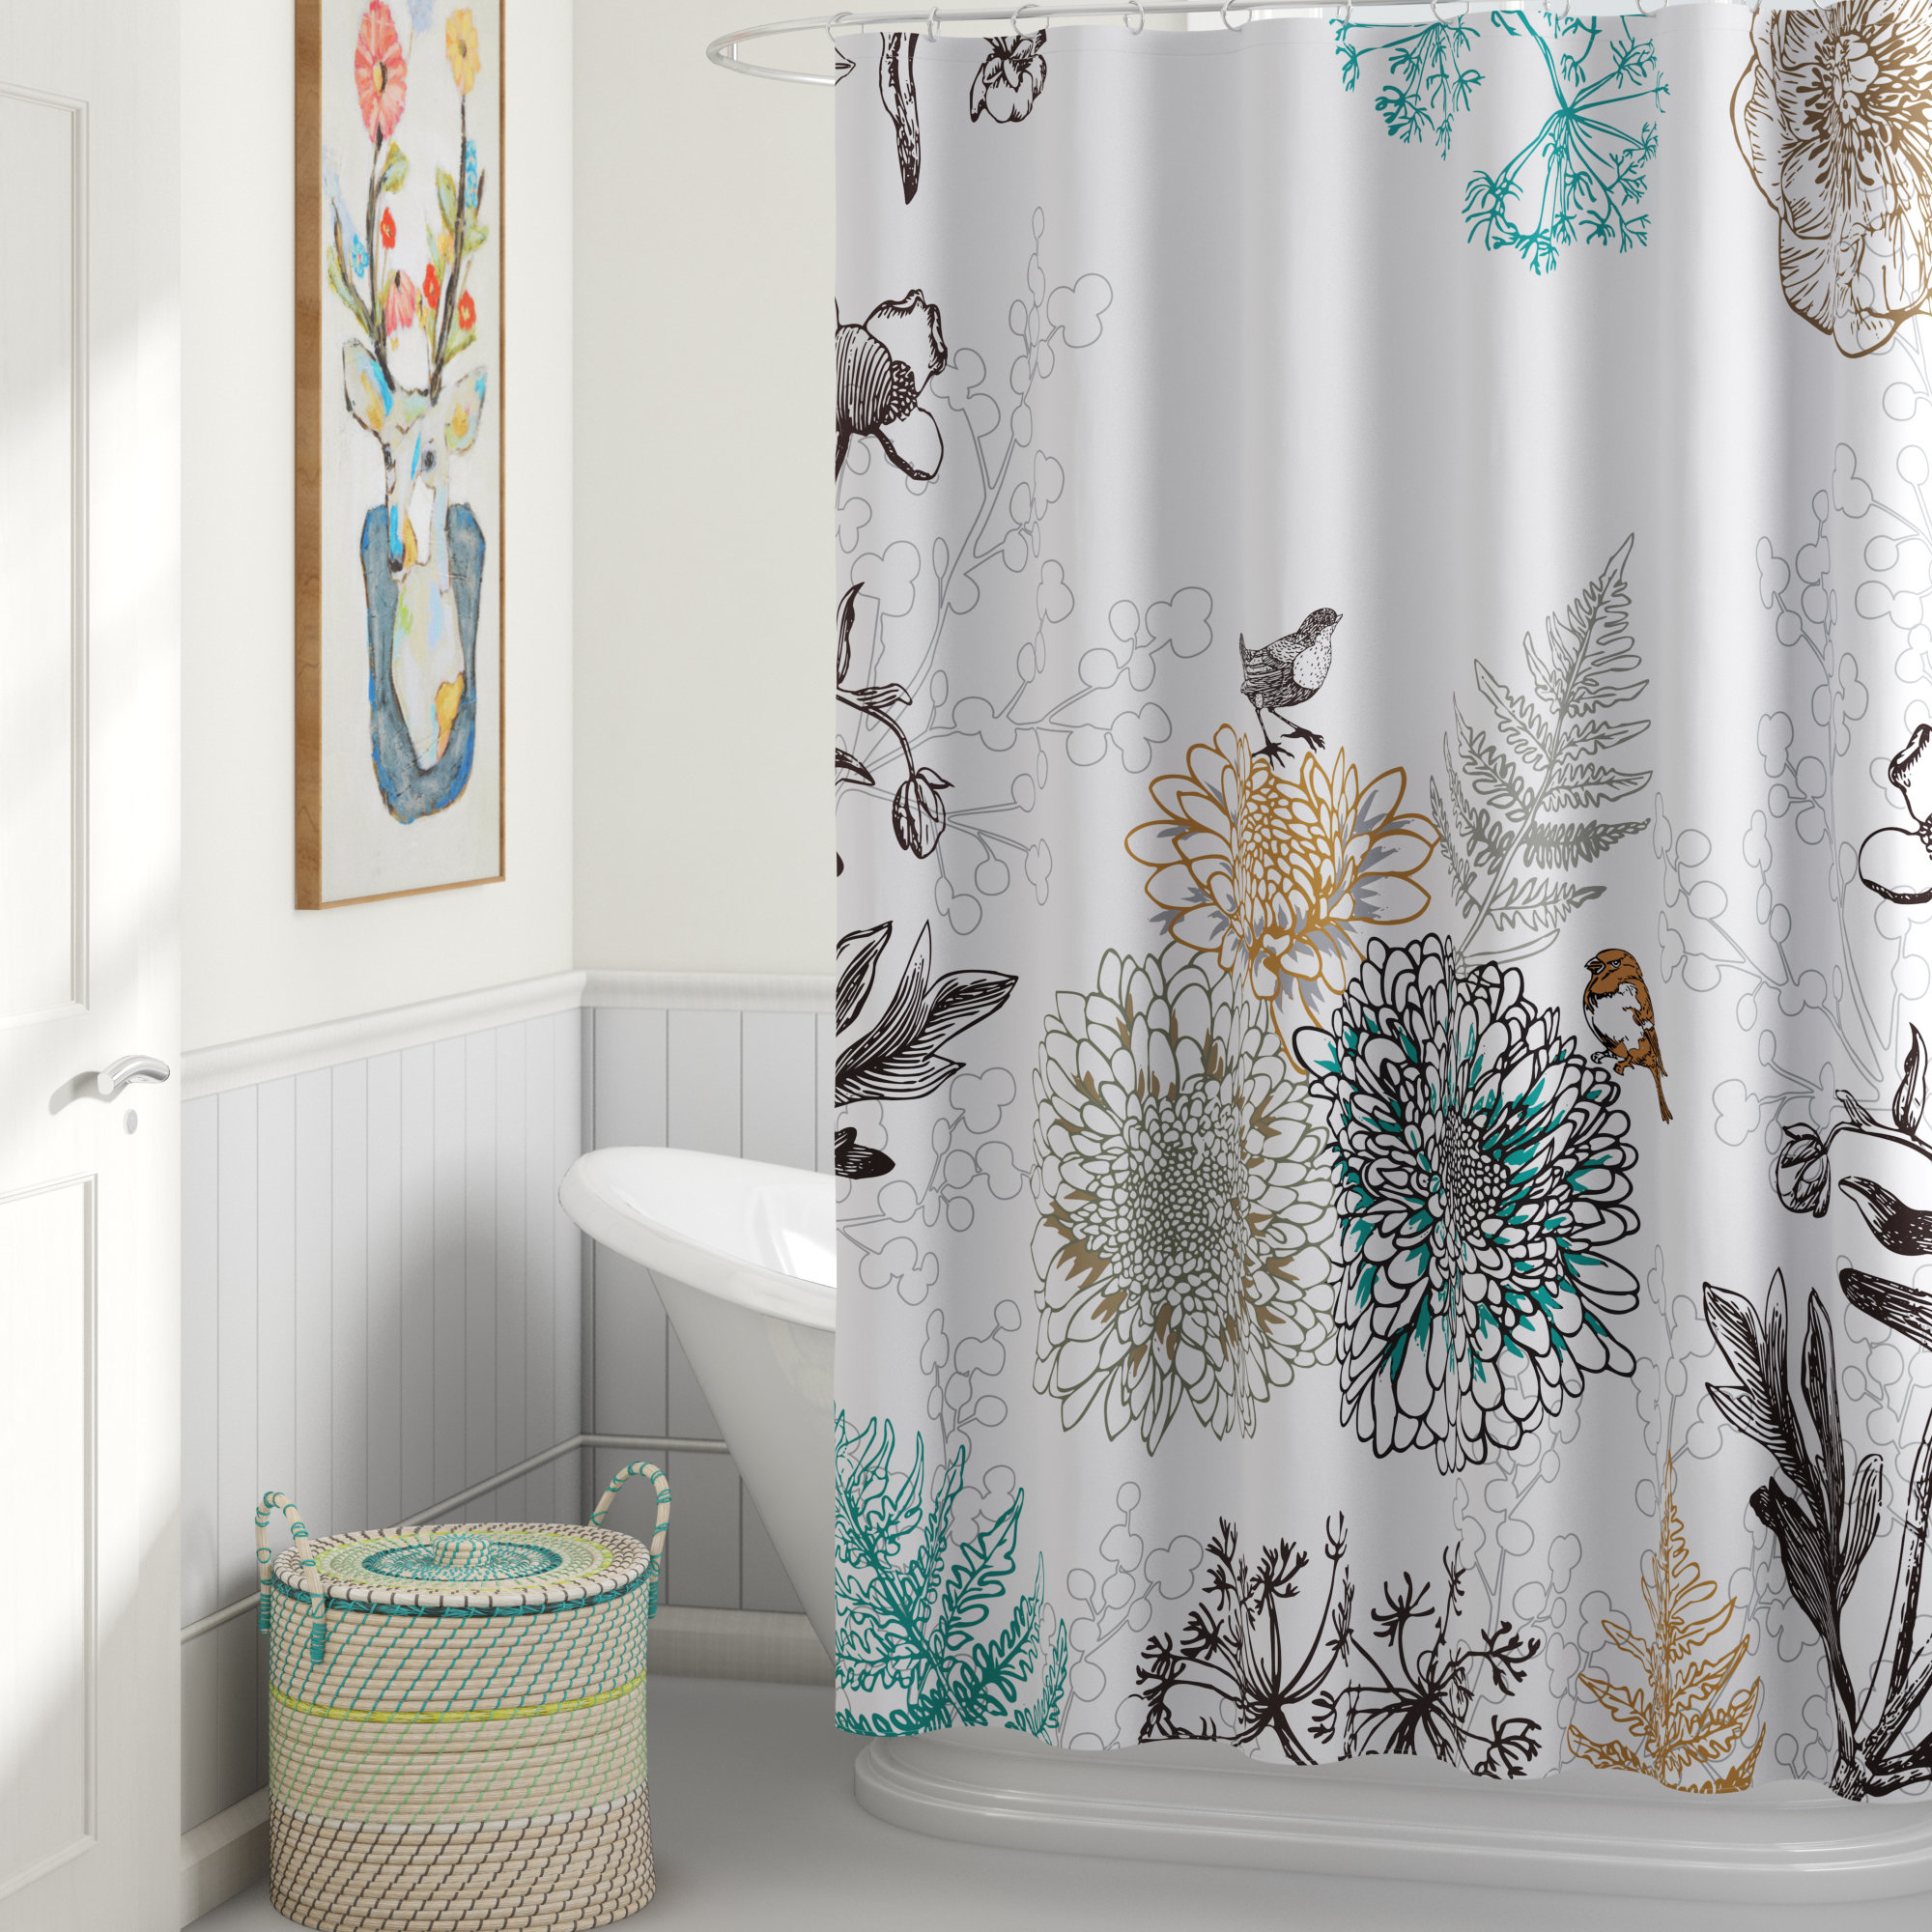 Fabric Shower Curtain Multicolor Forest Leaves with Reinforced Grommets SC-03 